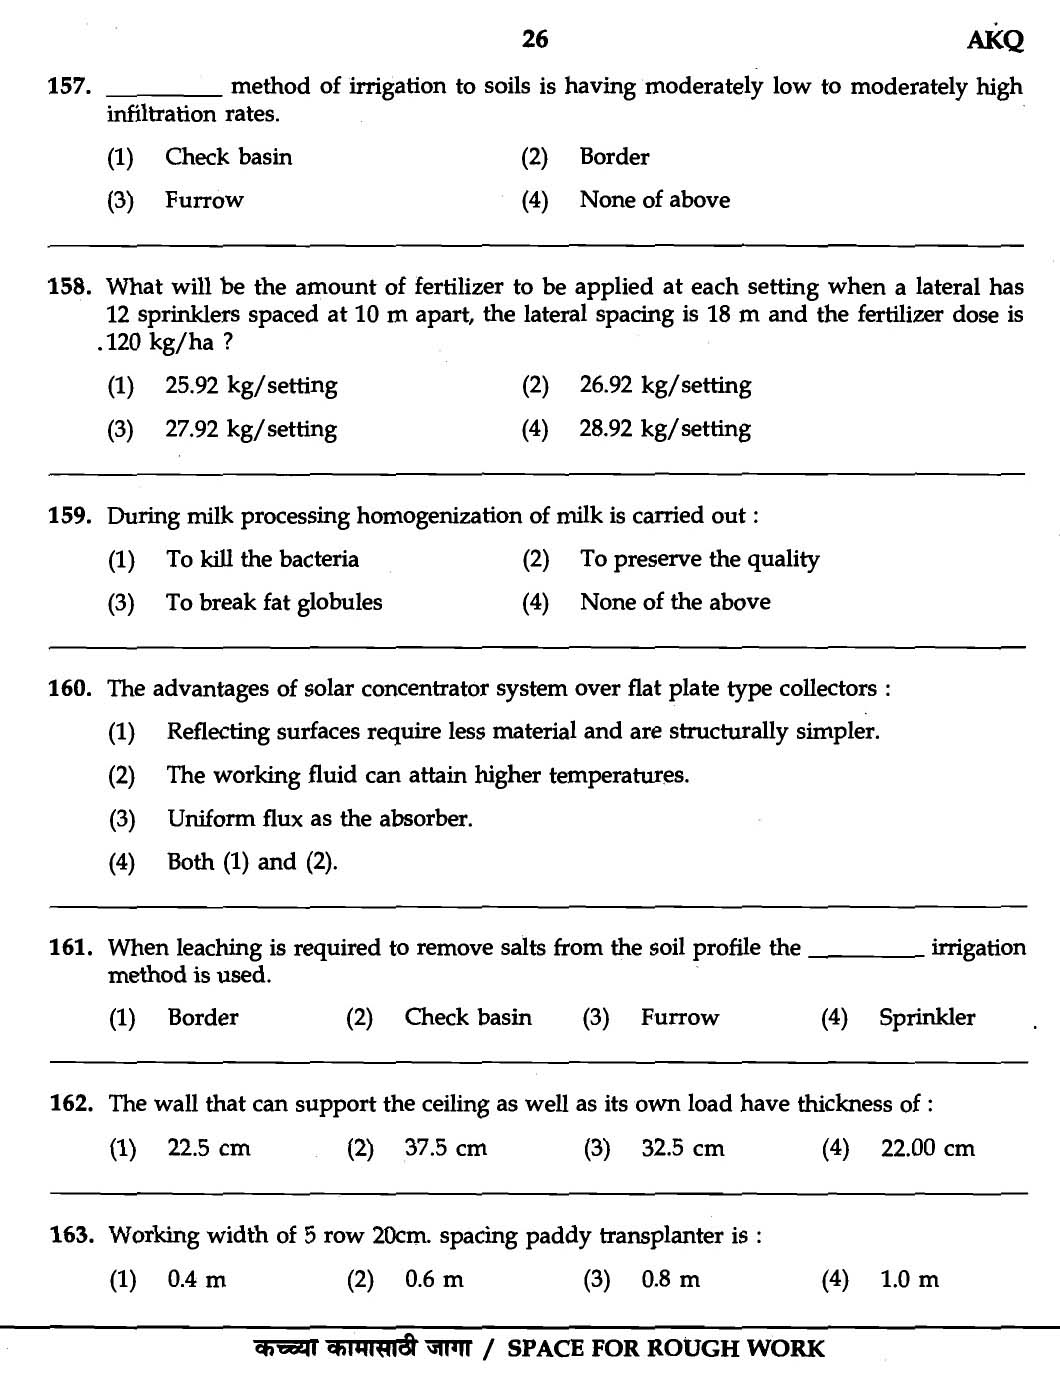 MPSC Agricultural Services Exam 2007 Question Paper Agricultural Engineering 24